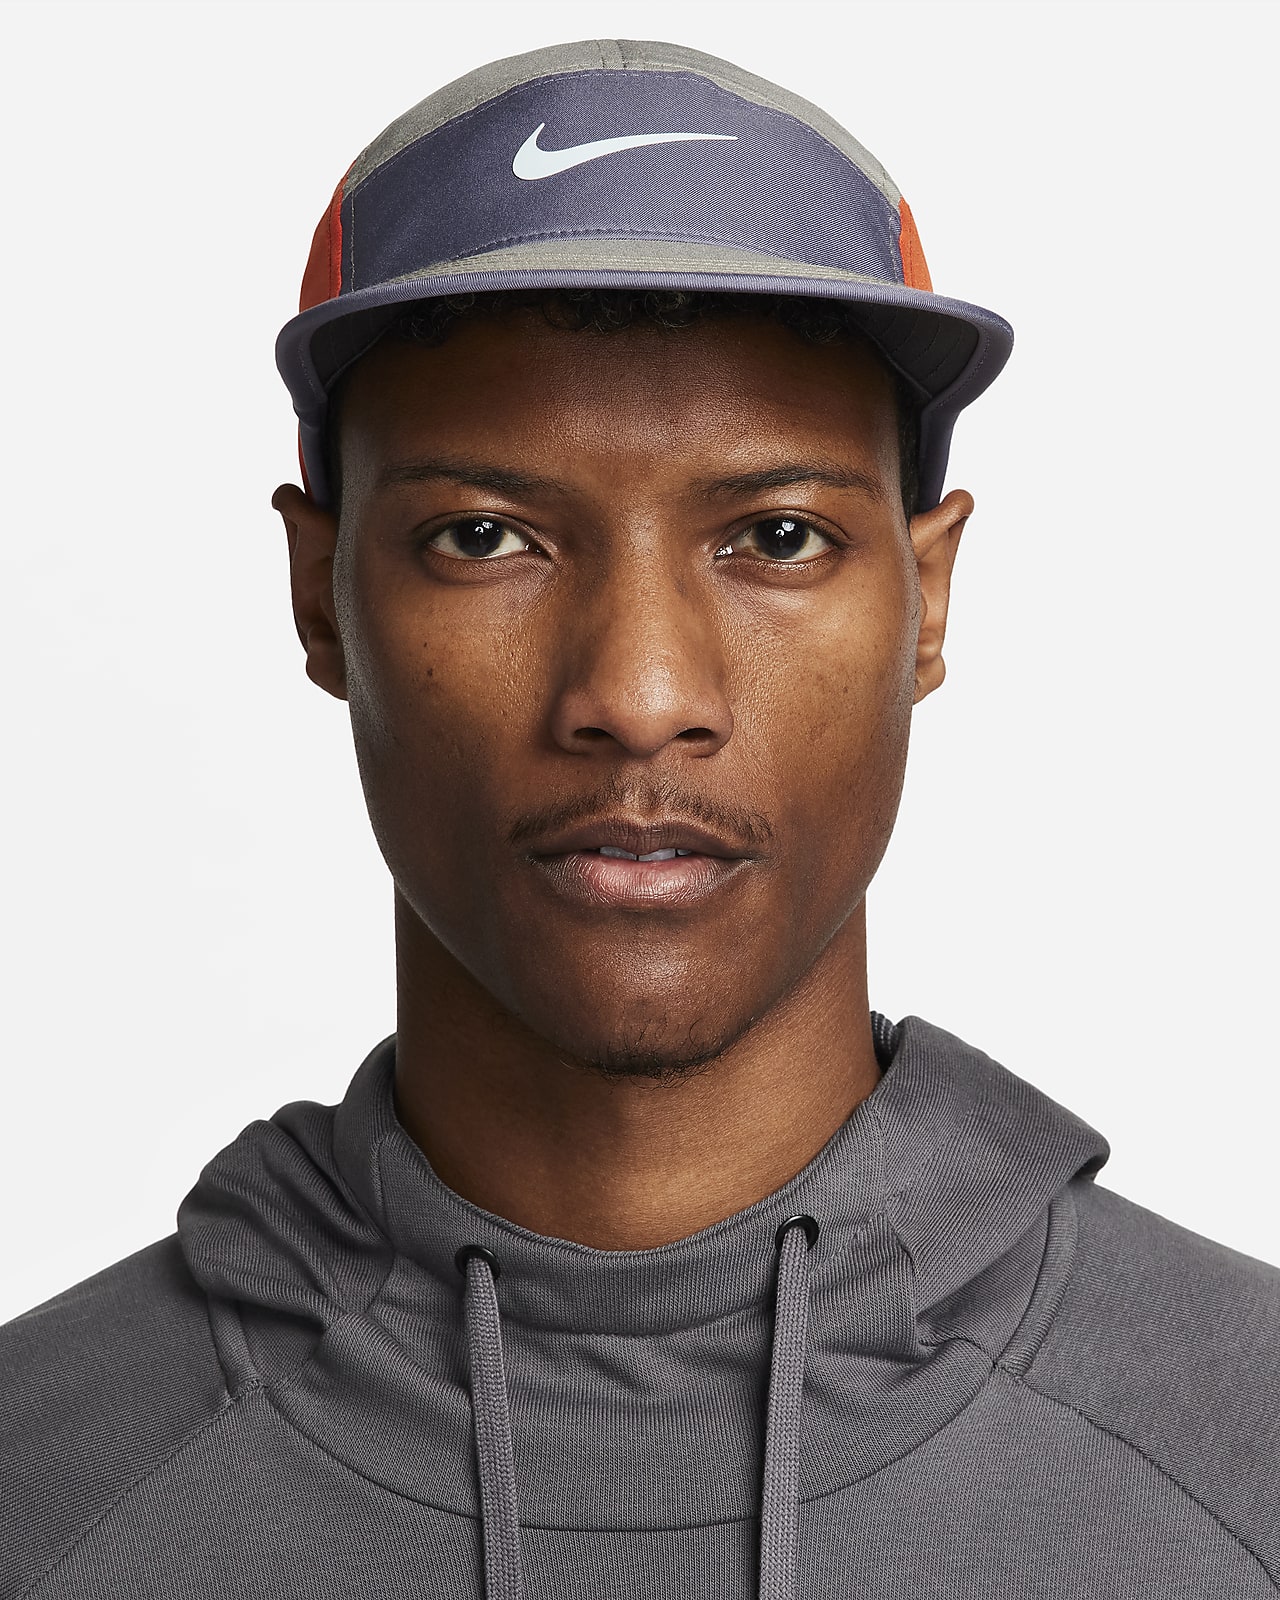 https://static.nike.com/a/images/t_PDP_1280_v1/f_auto,q_auto:eco/c68308ab-1d55-43f8-86f2-5d7b9a307ad7/casquette-swoosh-sans-structure-dri-fit-fly-2VF4XK.png